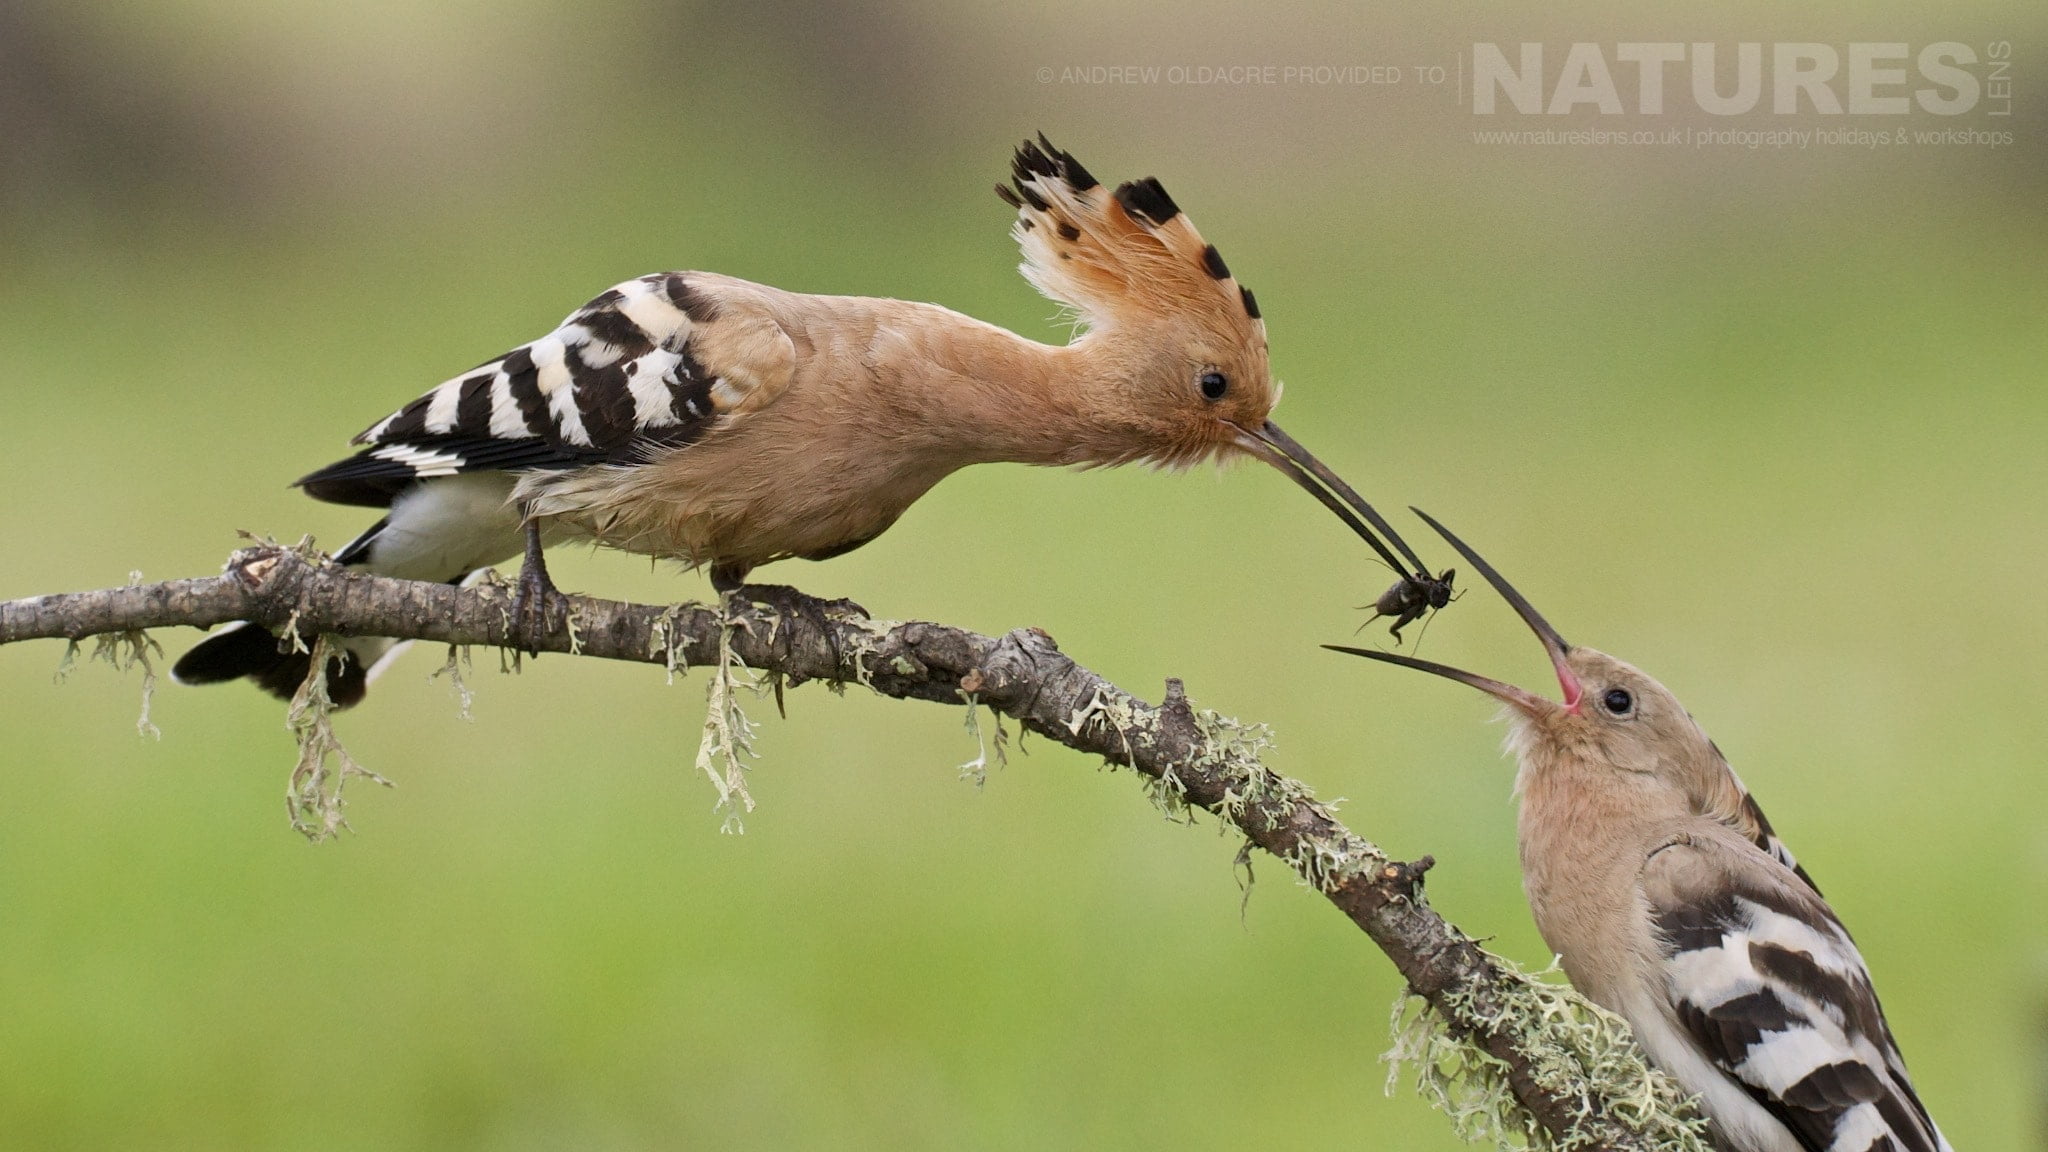 A Hoopoe Delicately Feeds It'S Young - Photographed On The Natureslens Birds Of Calera Photography Holiday